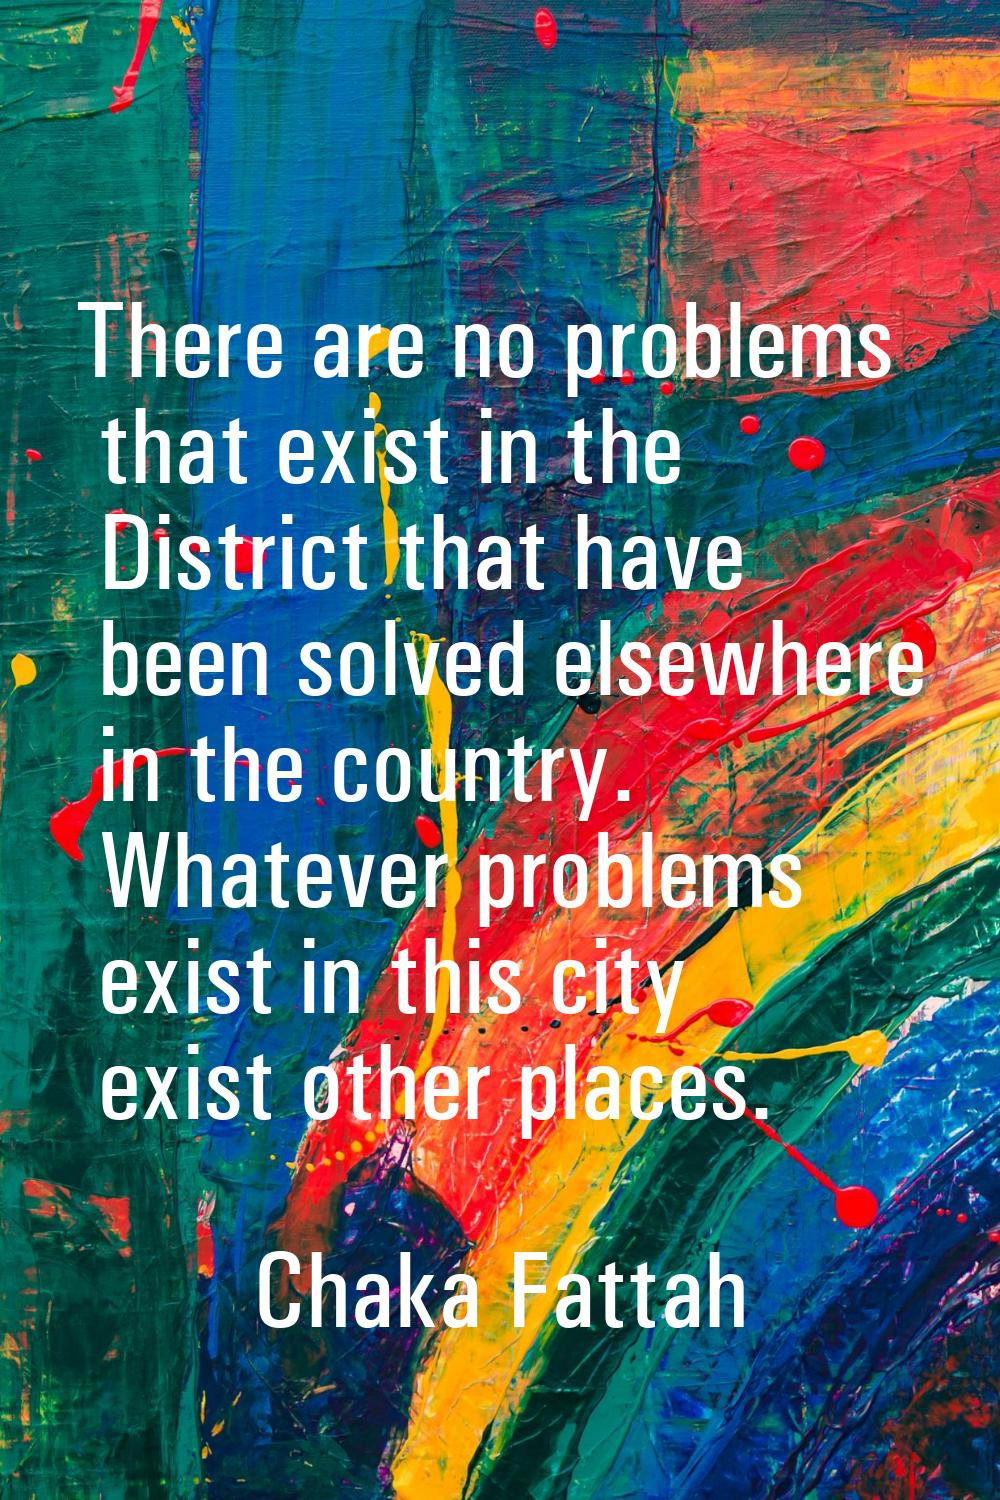 There are no problems that exist in the District that have been solved elsewhere in the country. Wh